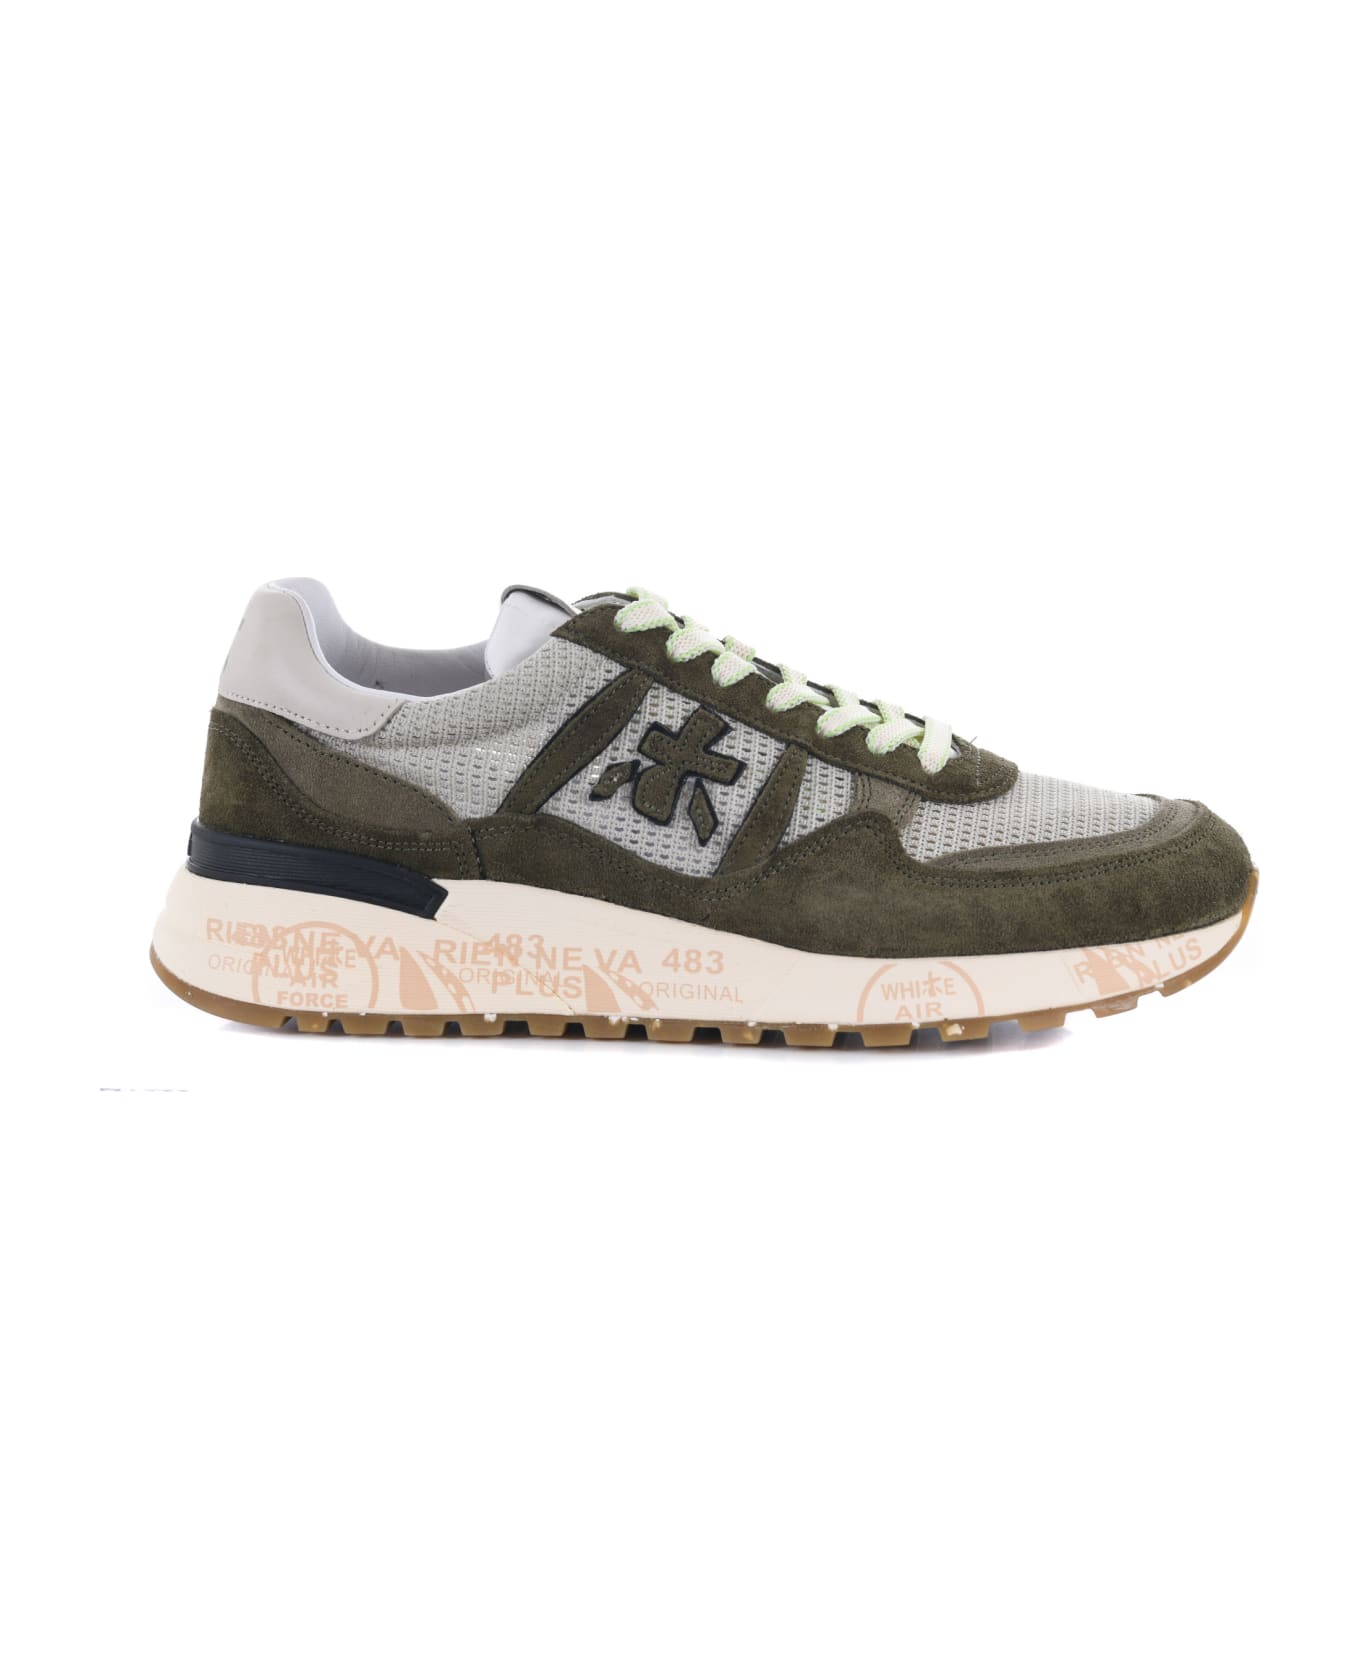 Premiata Sneakers In Suede And Perforated Mesh - Verde militare